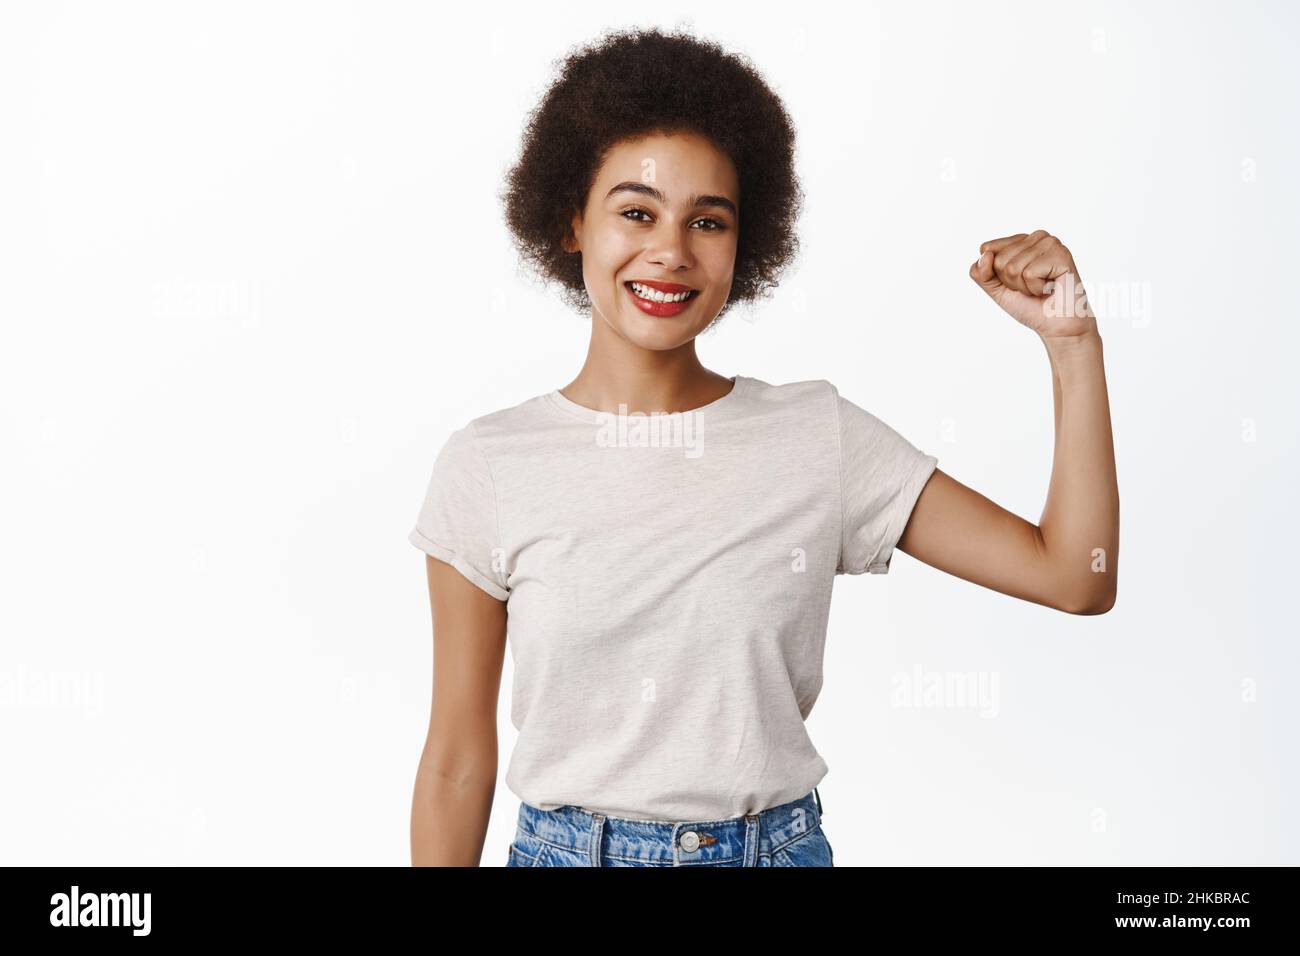 Workout and women power. Smiling african woman showing her strength, flexing biceps, raising arm with muscle, standing over white background Stock Photo